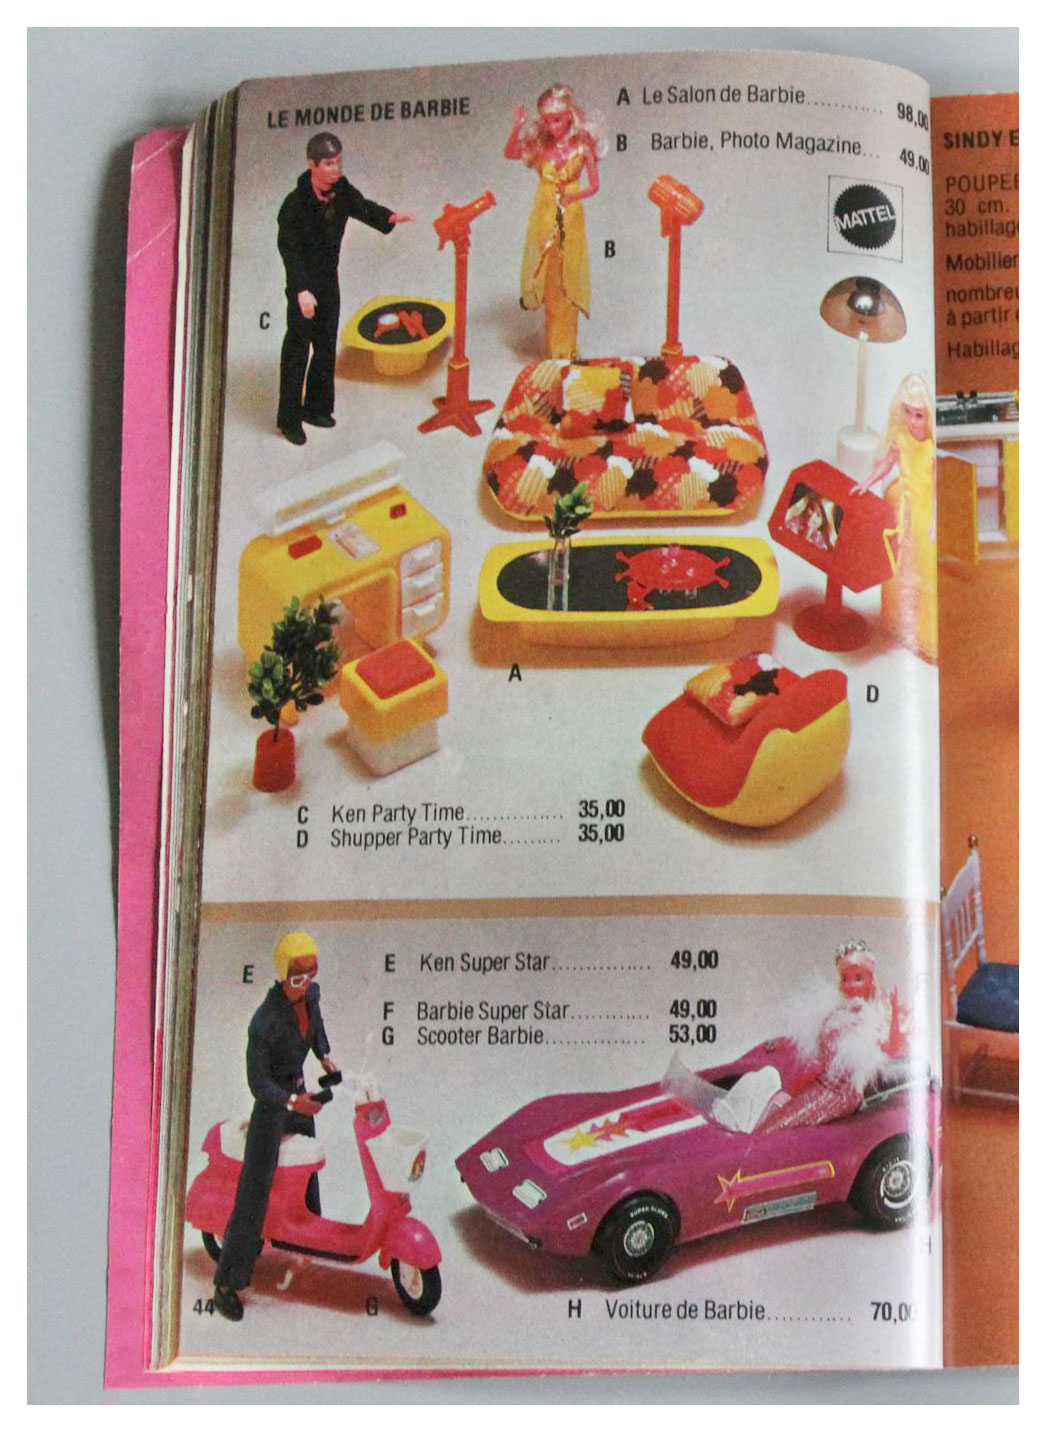 From 1978 French Jouets SAJ catalogue